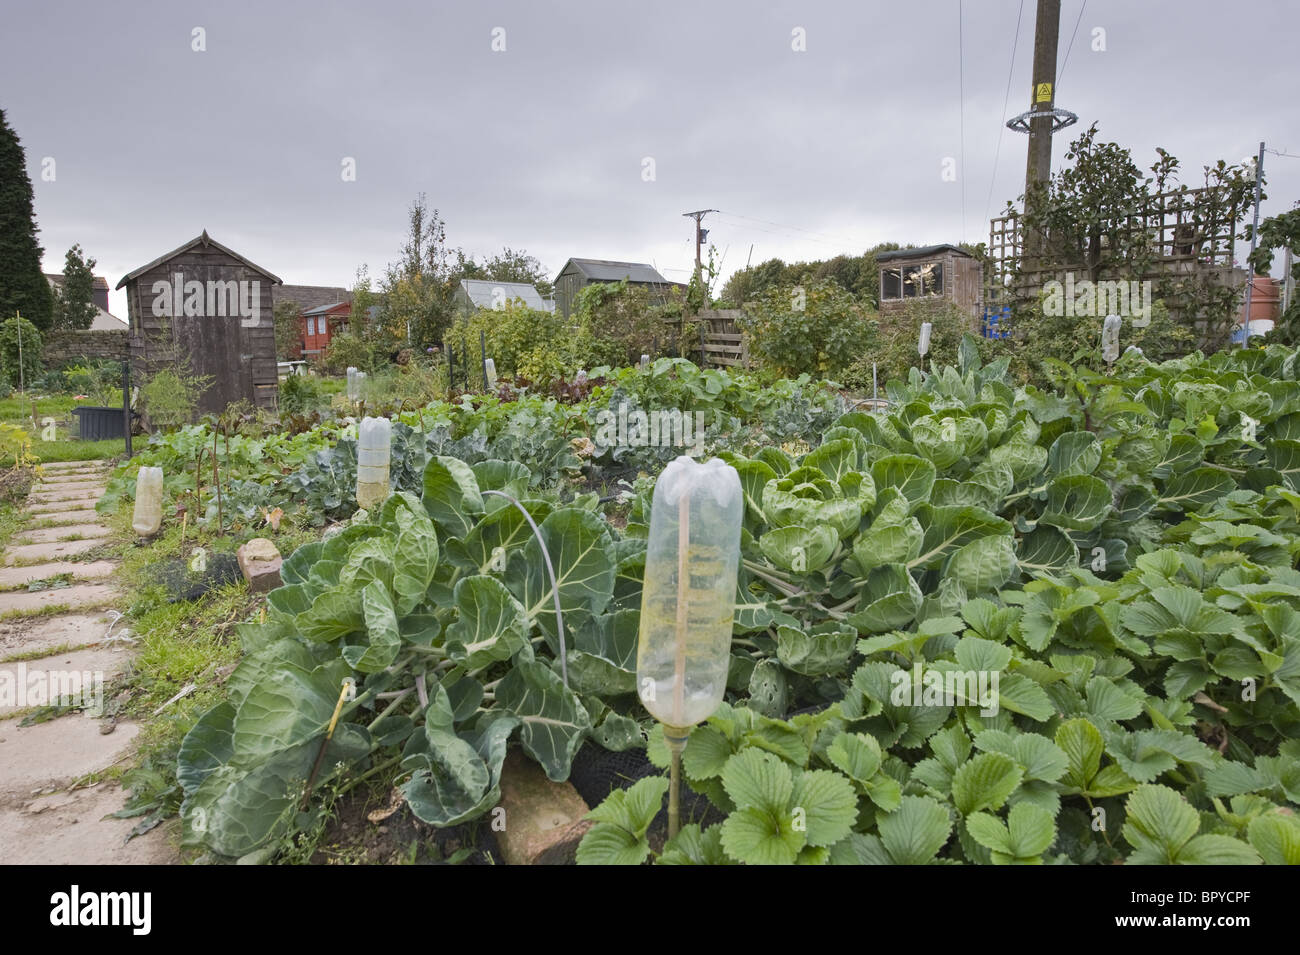 Produce growing on allotments. Stock Photo